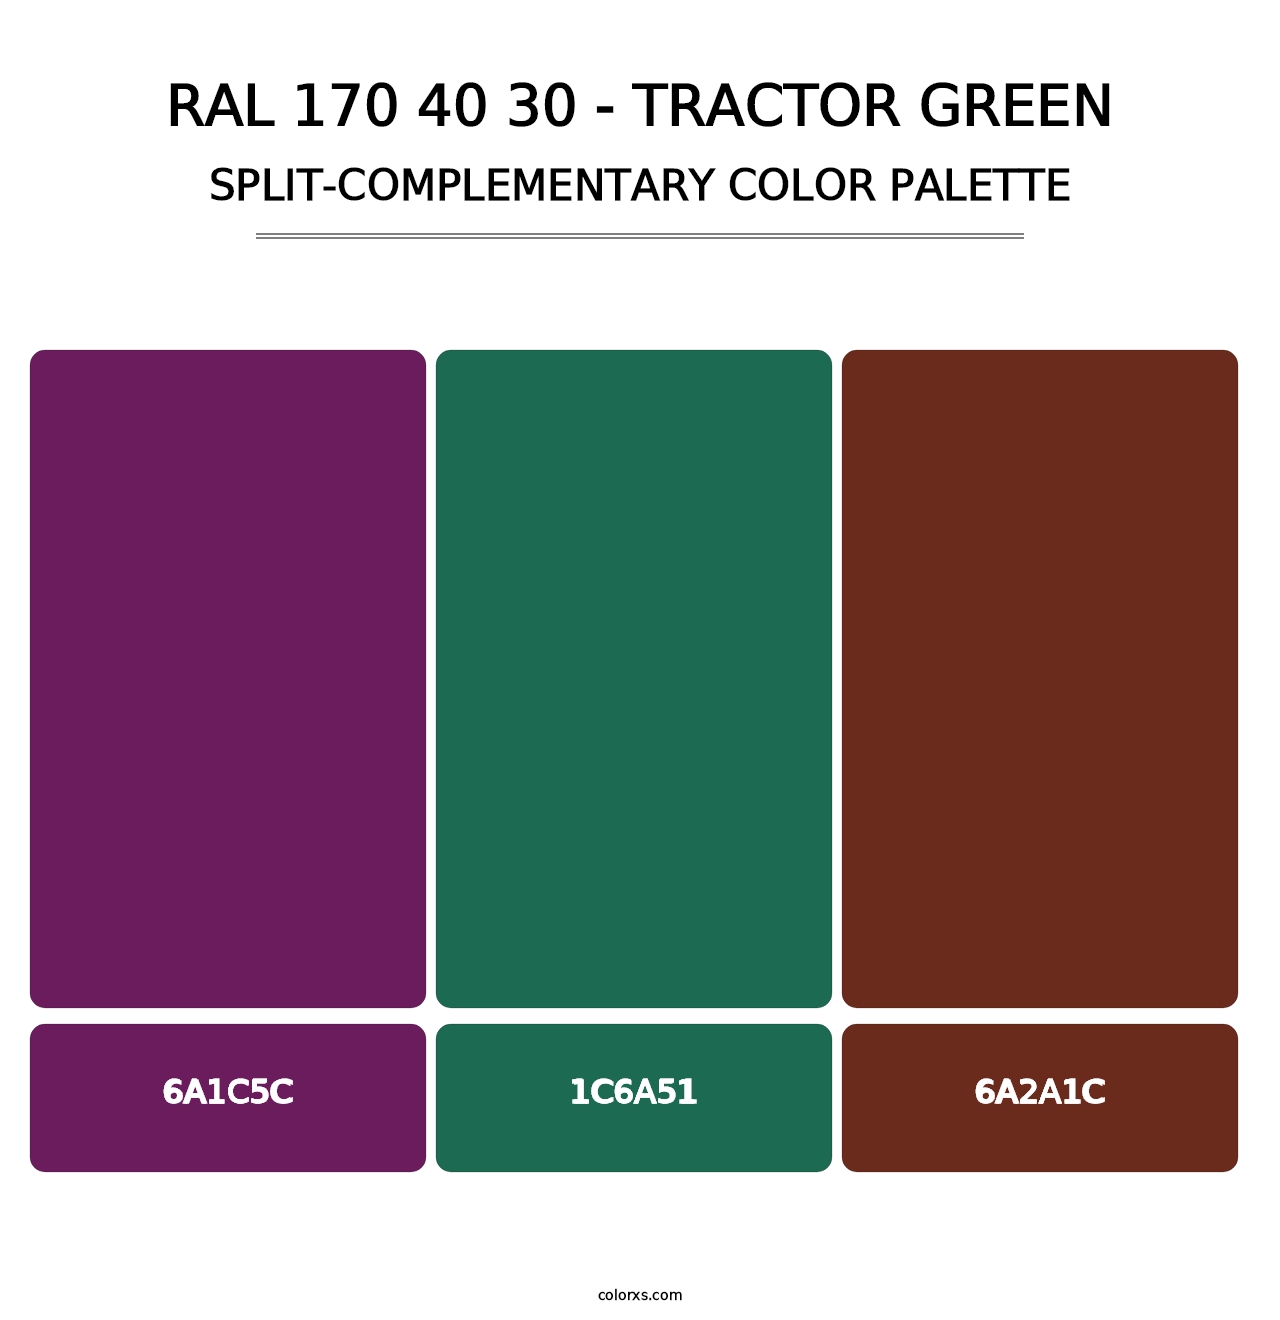 RAL 170 40 30 - Tractor Green - Split-Complementary Color Palette